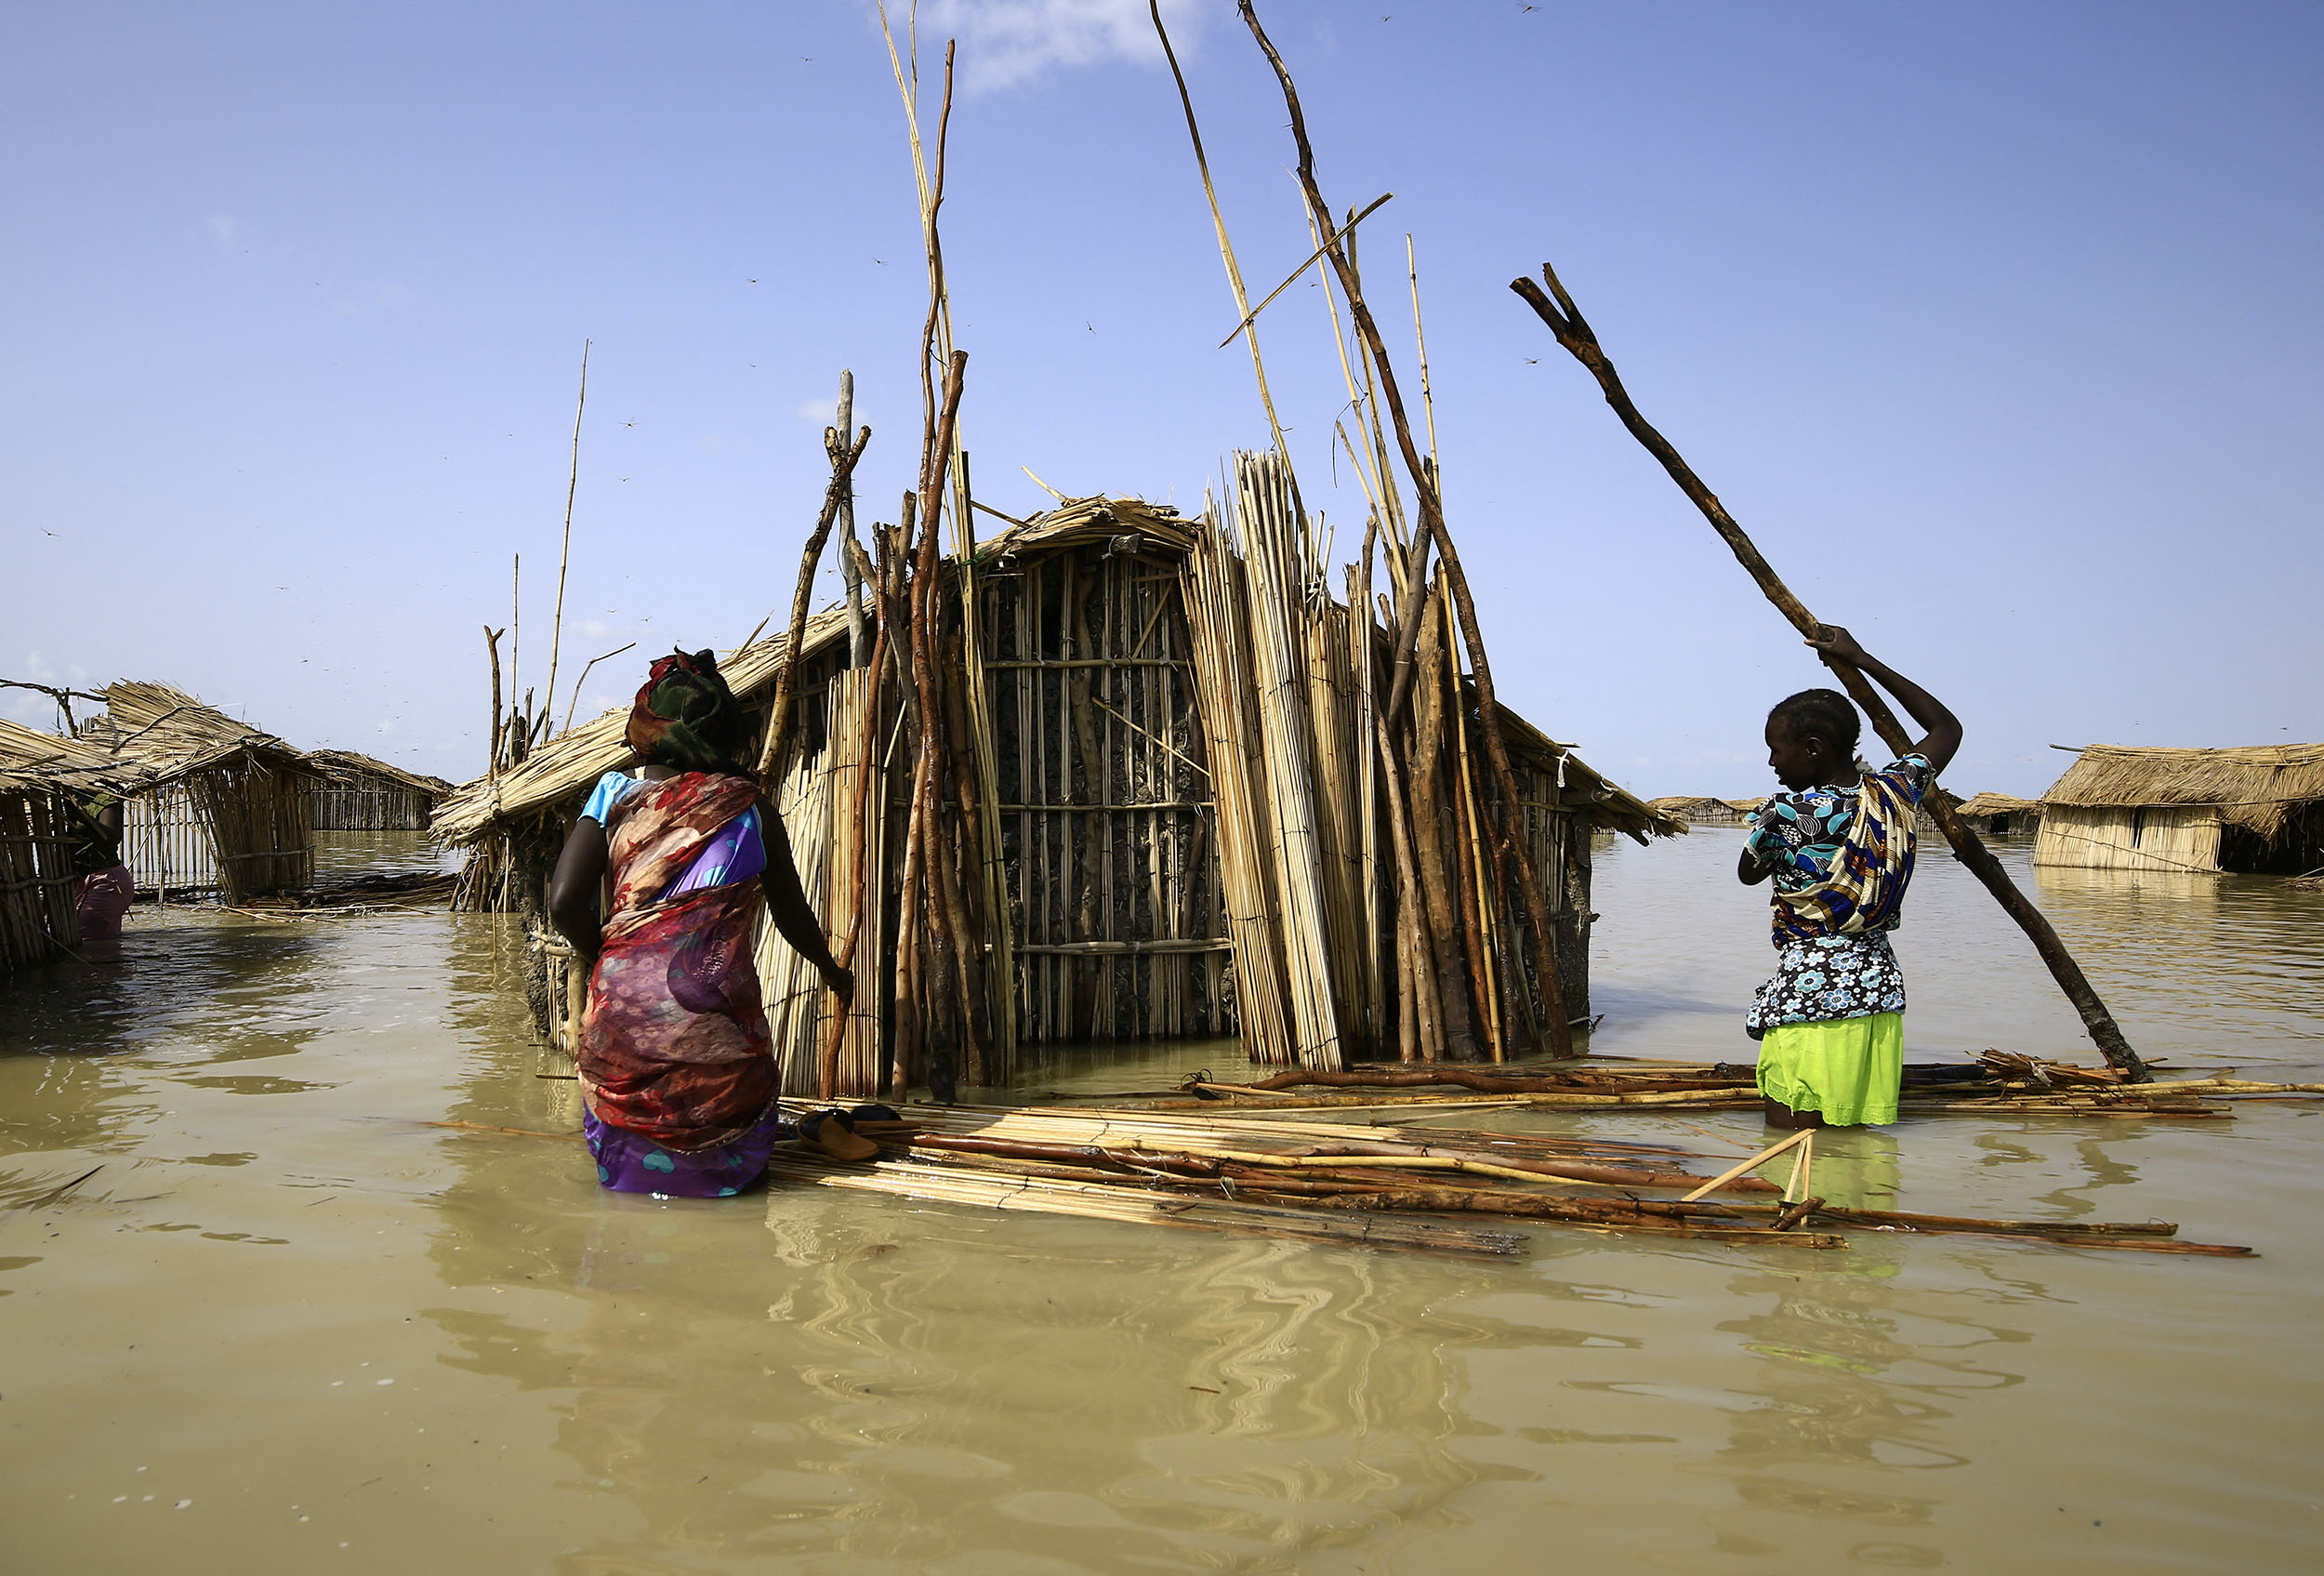 Two South Sudanese women stand in hip-high water next to their damaged home